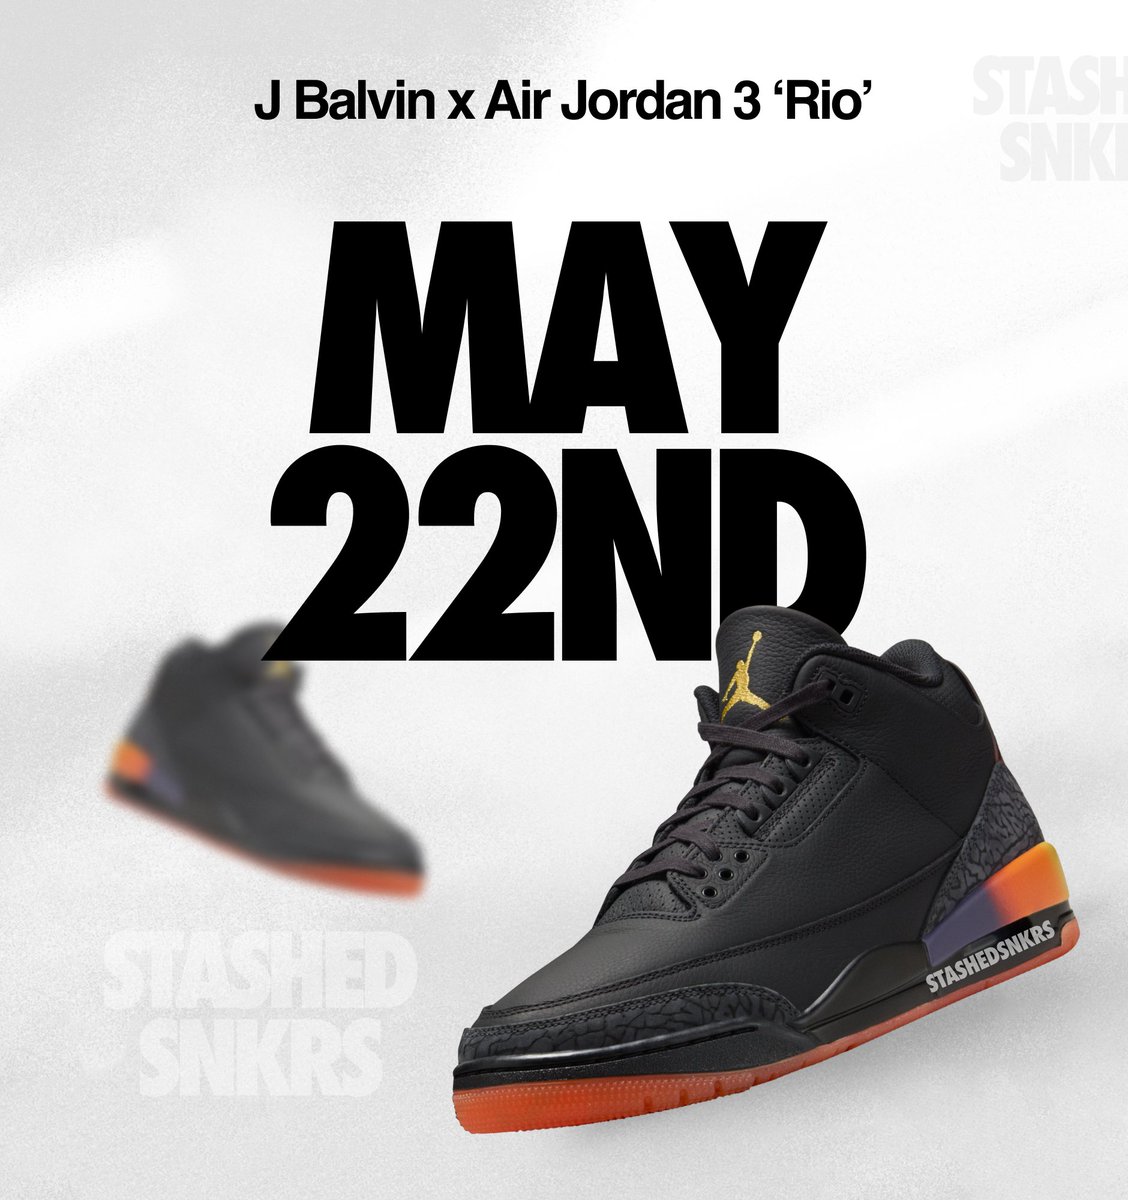 JUST LOADED: J Balvin x Air Jordan 3 'Rio' Releasing May 22nd on the SNKRS App 🇪🇺🇬🇧